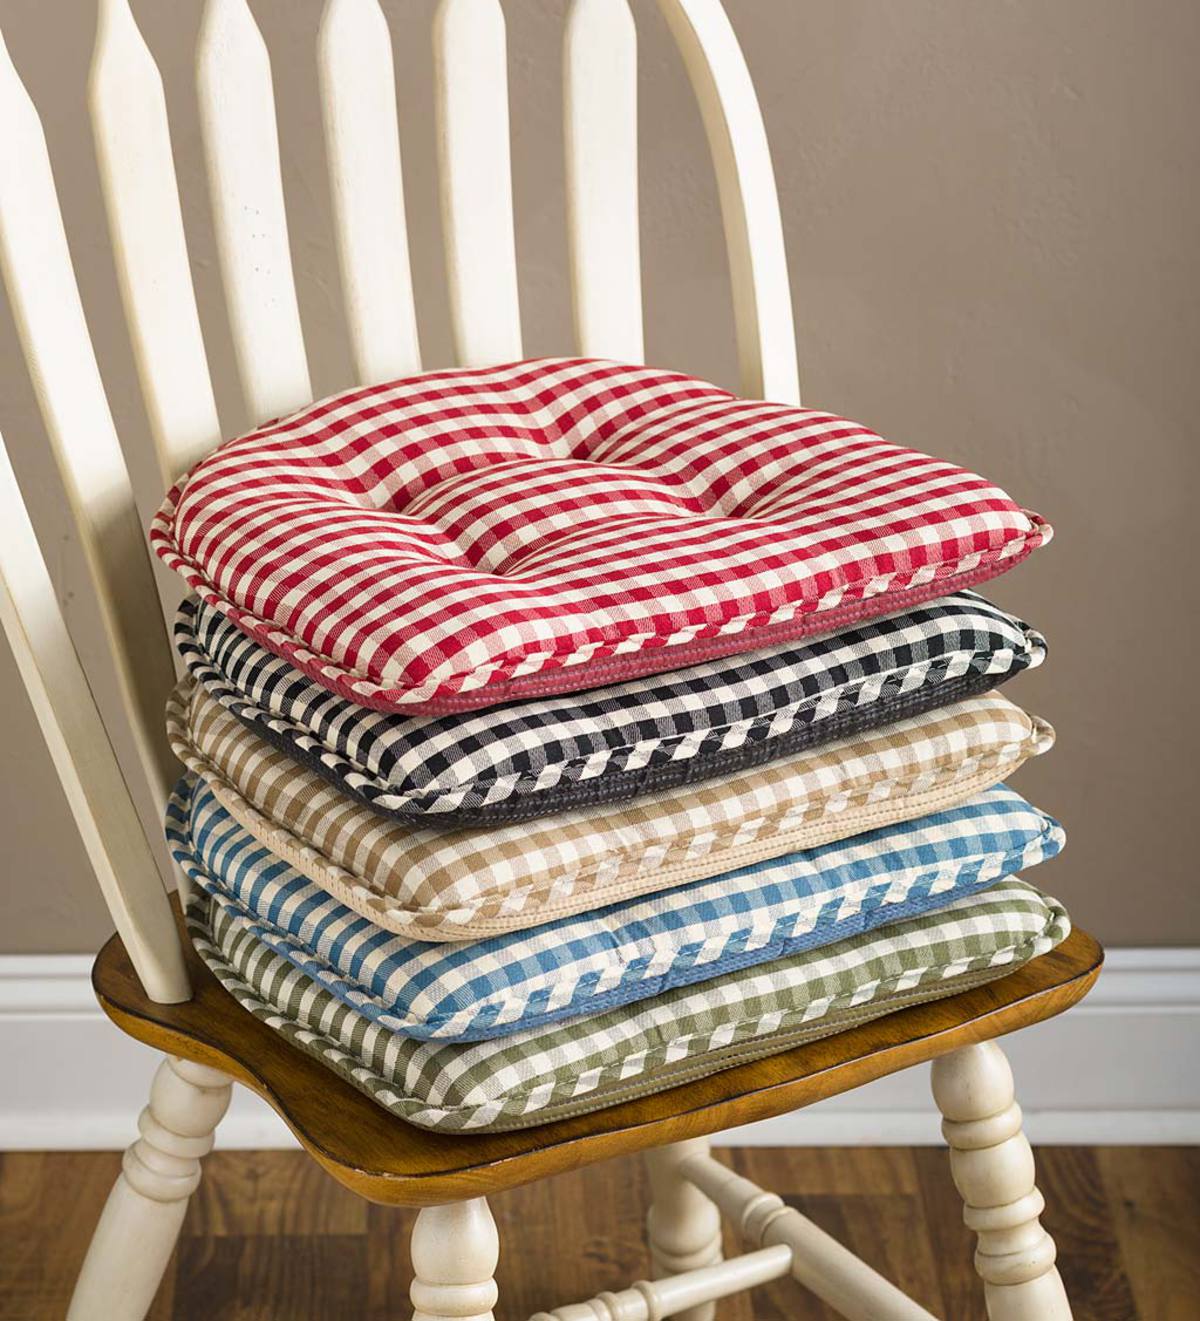 Buffalo Check 100% Cotton Tufted Chair Pad Cushion (Set of 4) The Holiday Aisle Size: 16 x 16